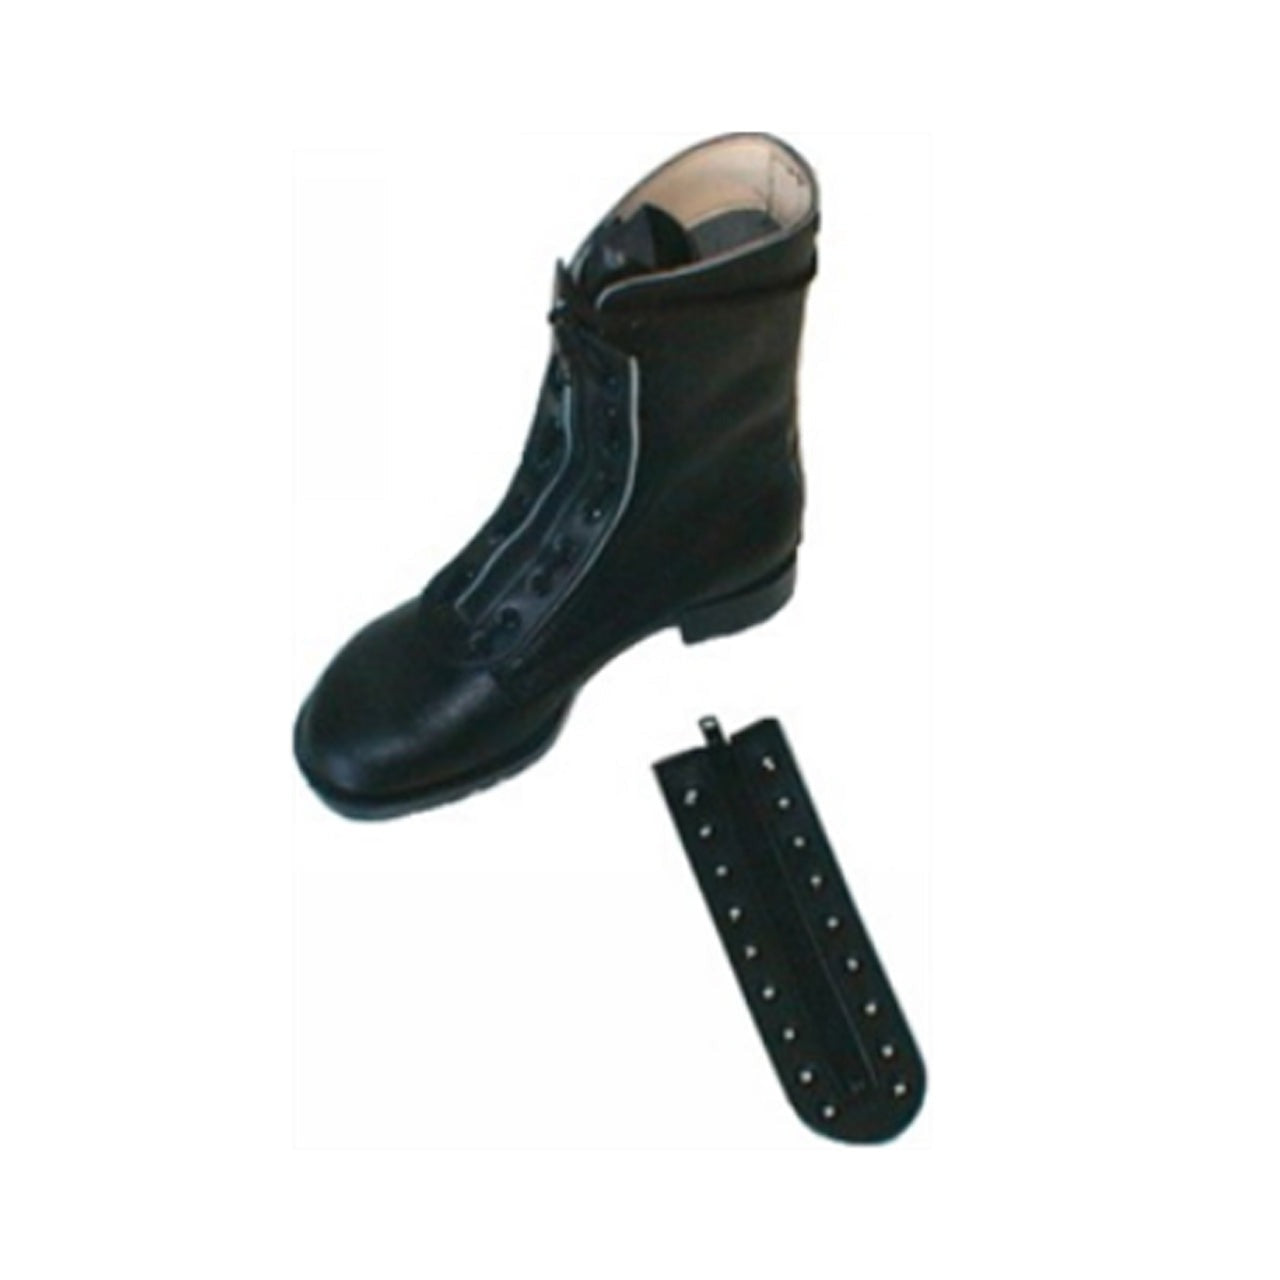 SOLD Archive Area-- Army Speed Lace Boot Zipper Inserts